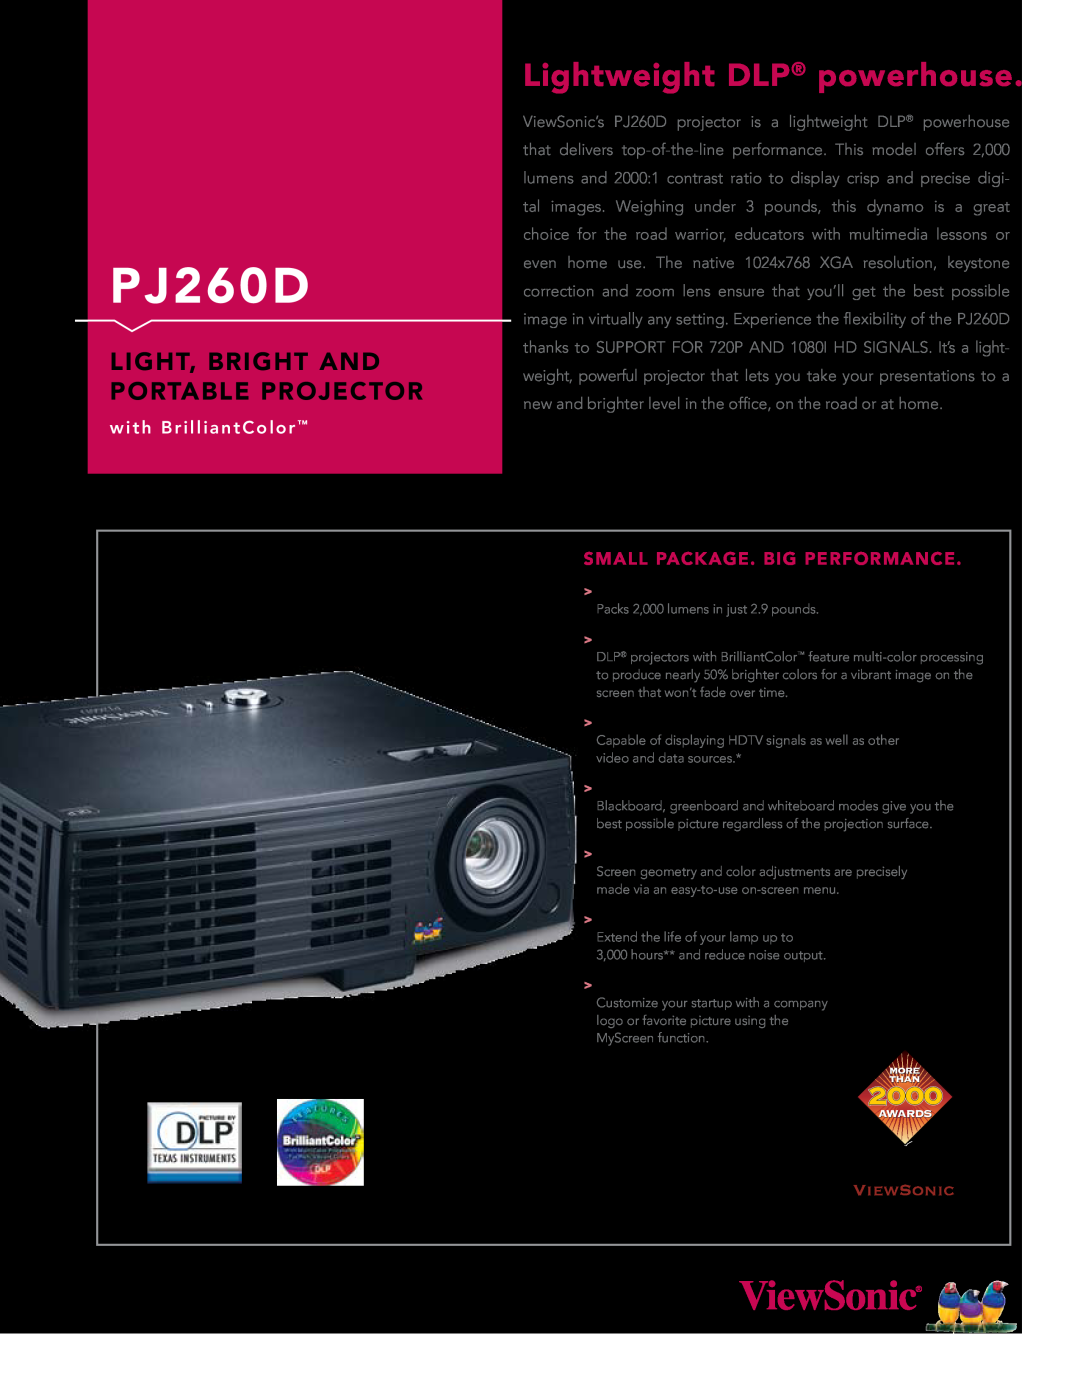 ViewSonic PJ600-1 manual PJ260D, Lightweight DLP powerhouse, Light, Bright And Portable Projector, with BrilliantColor 